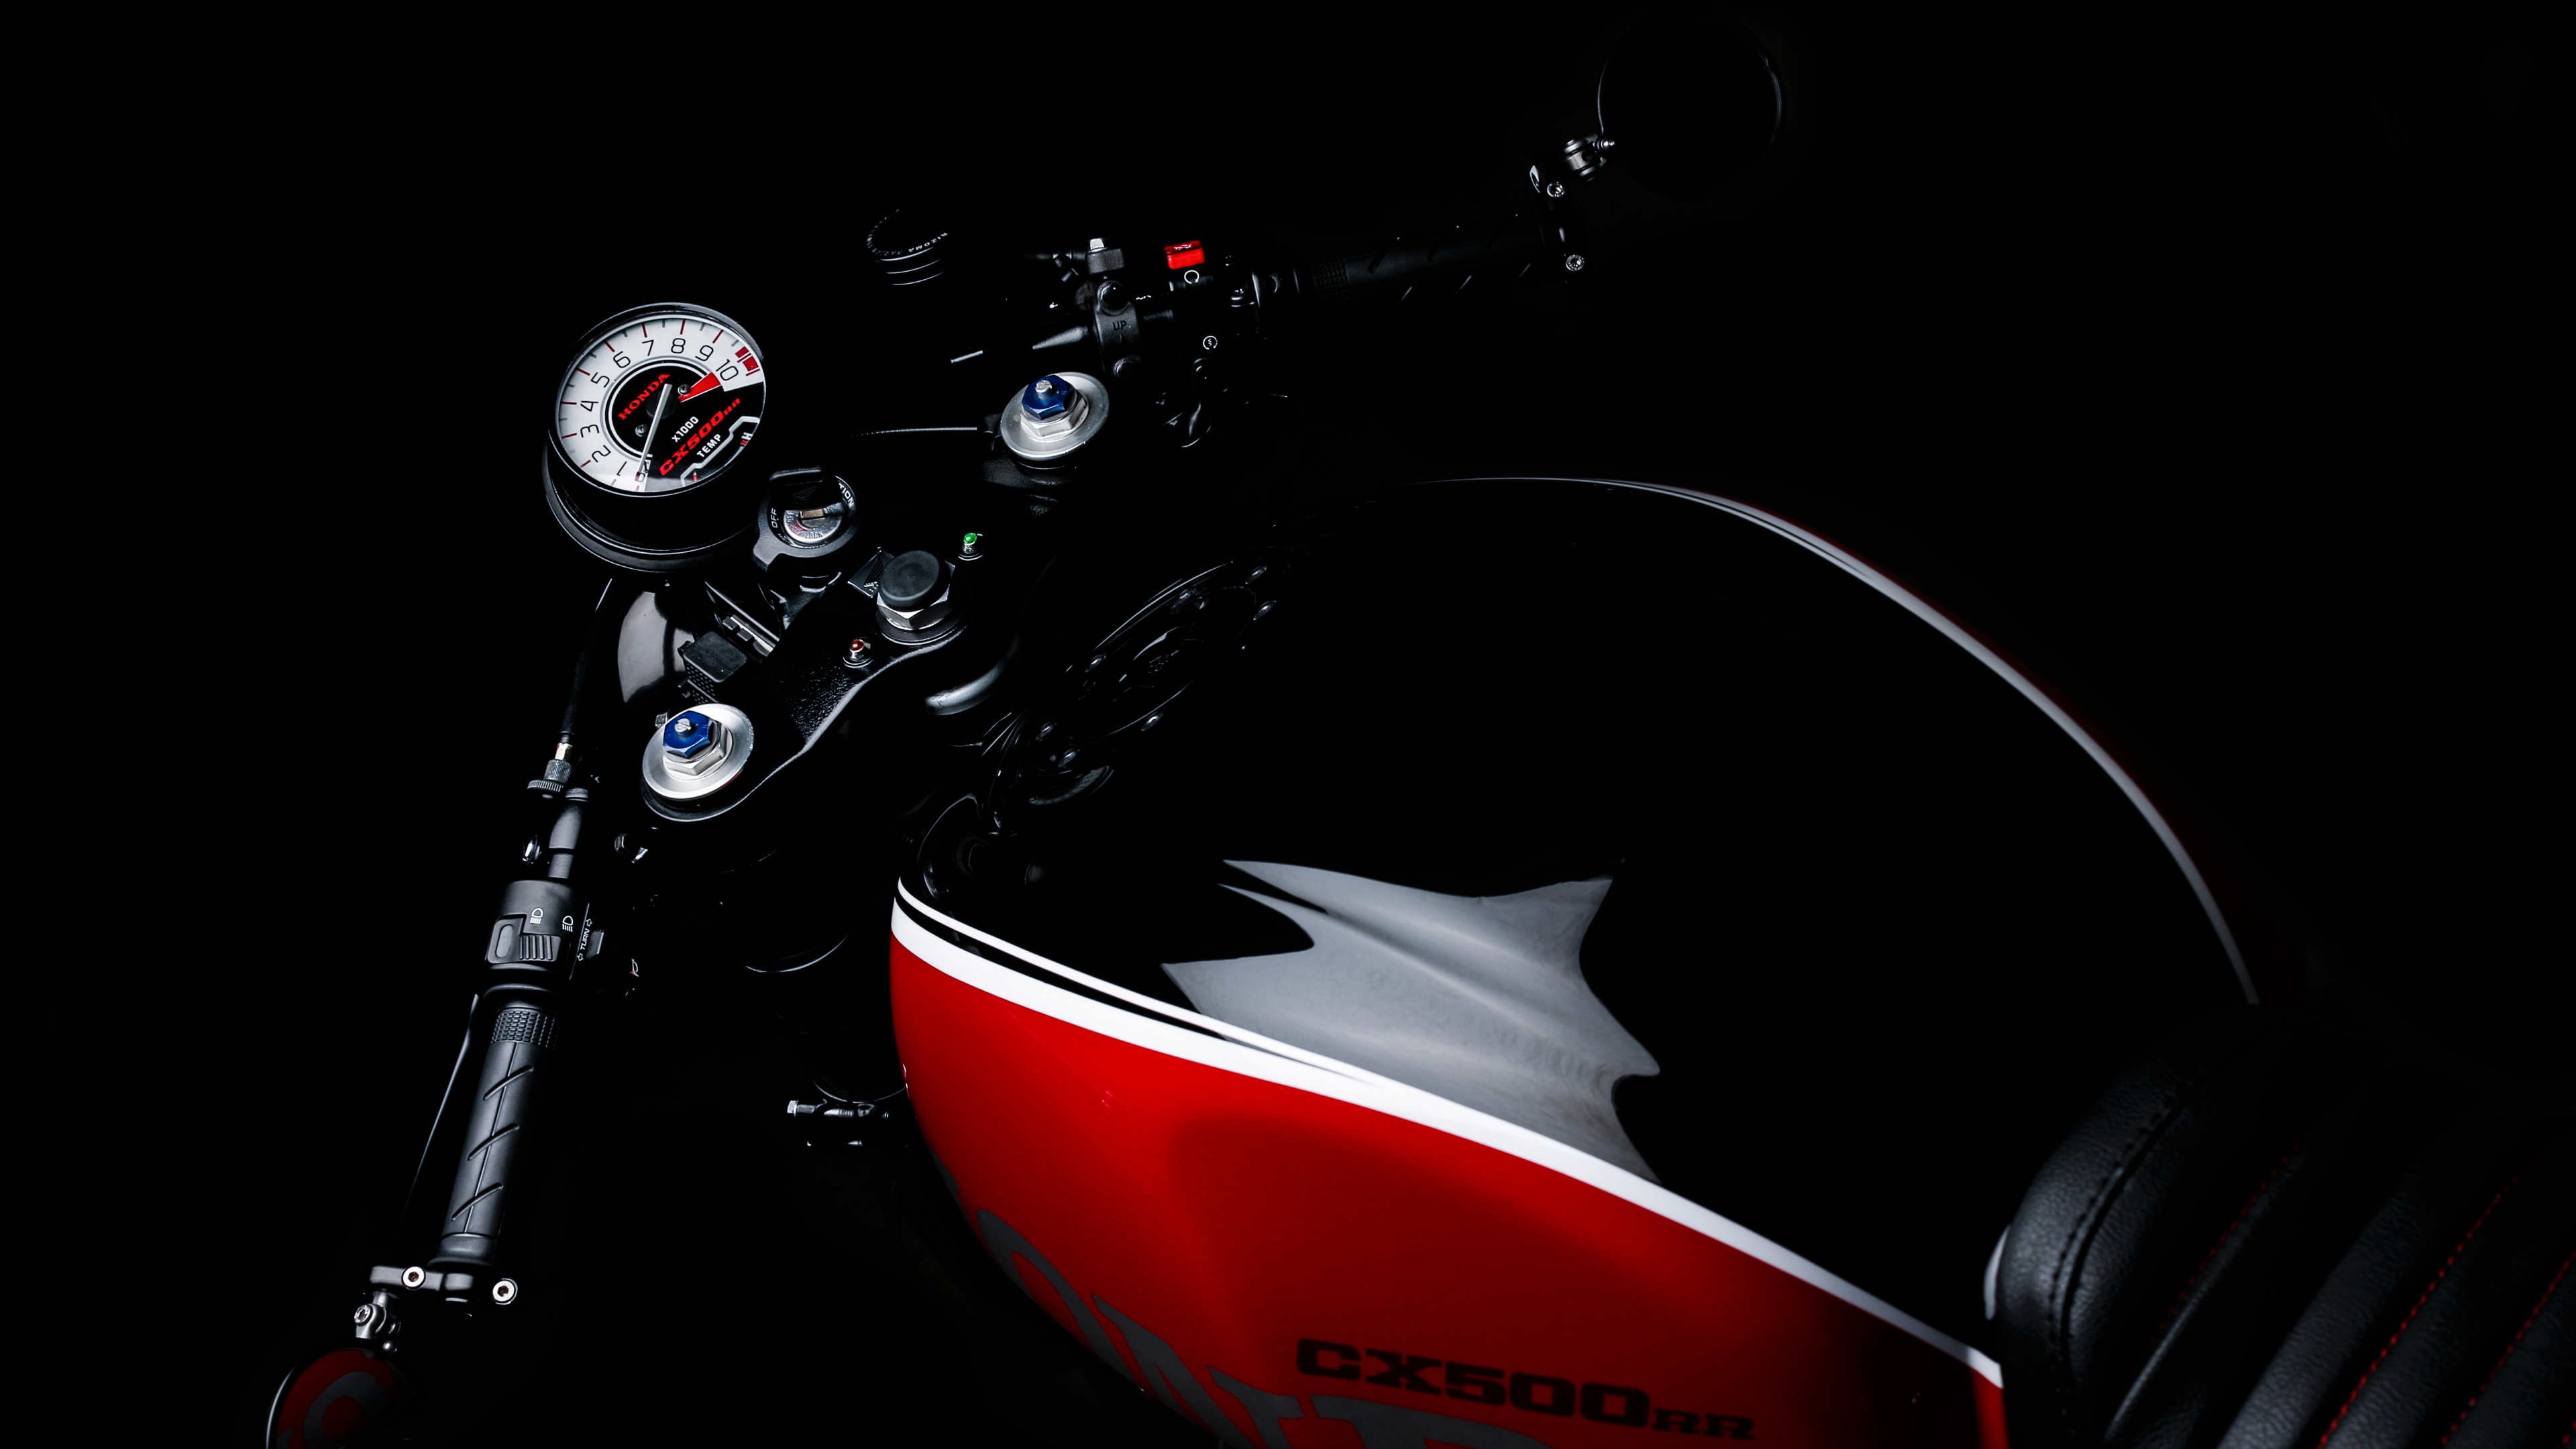 Red and Black Honda Motorcycle. Wallpaper in 3840x2160 Resolution